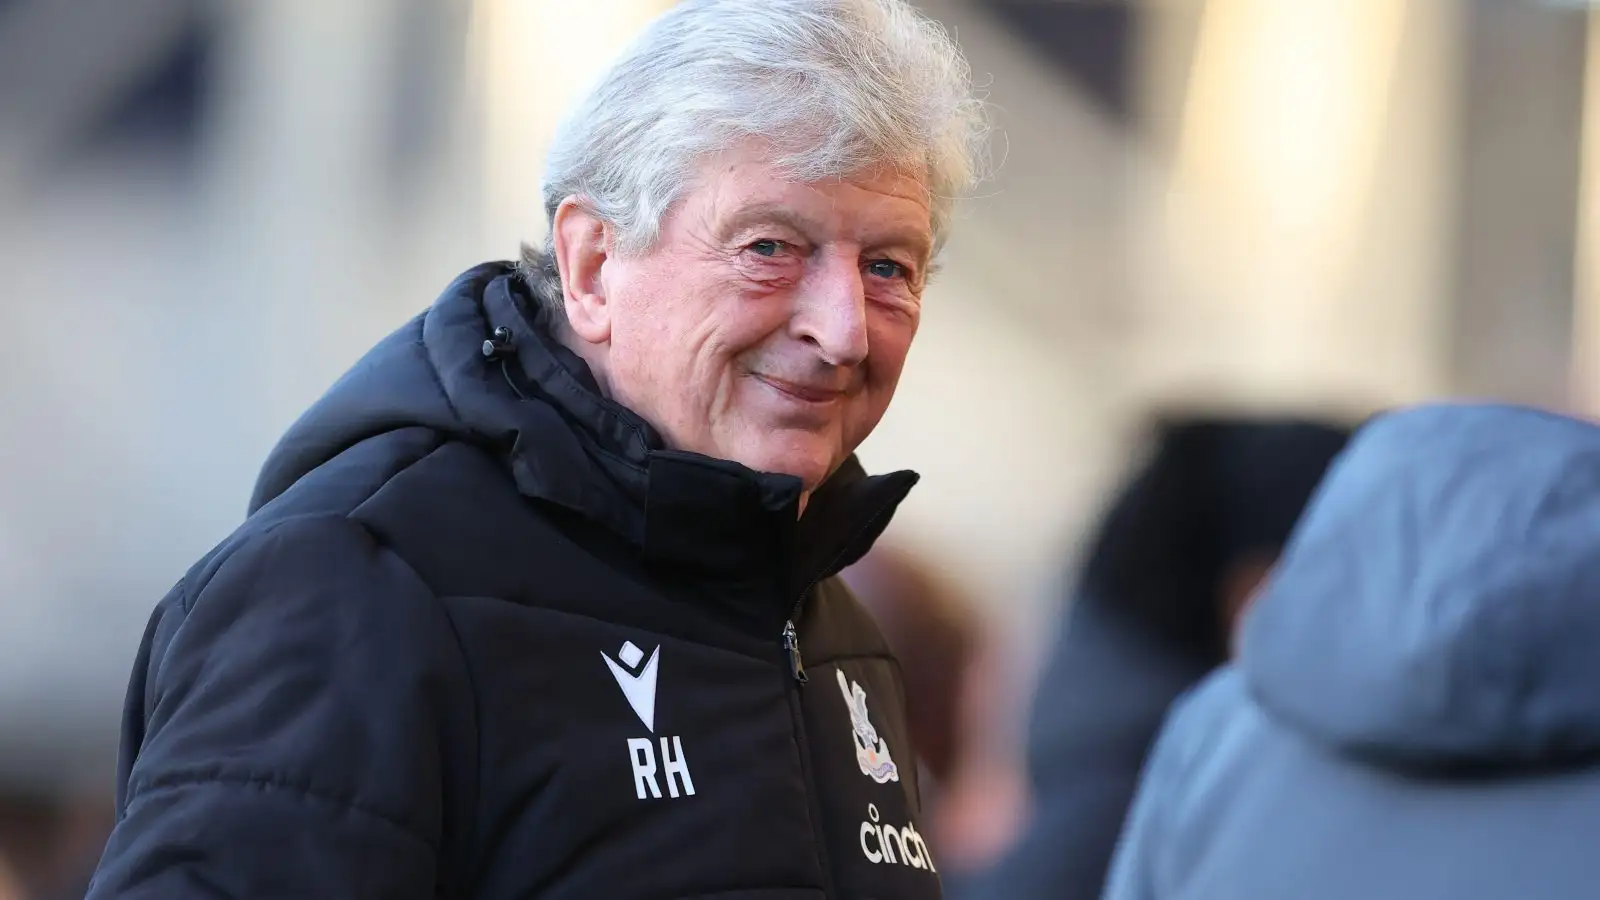 Crystal Palace manager Roy Hodgson before a match.